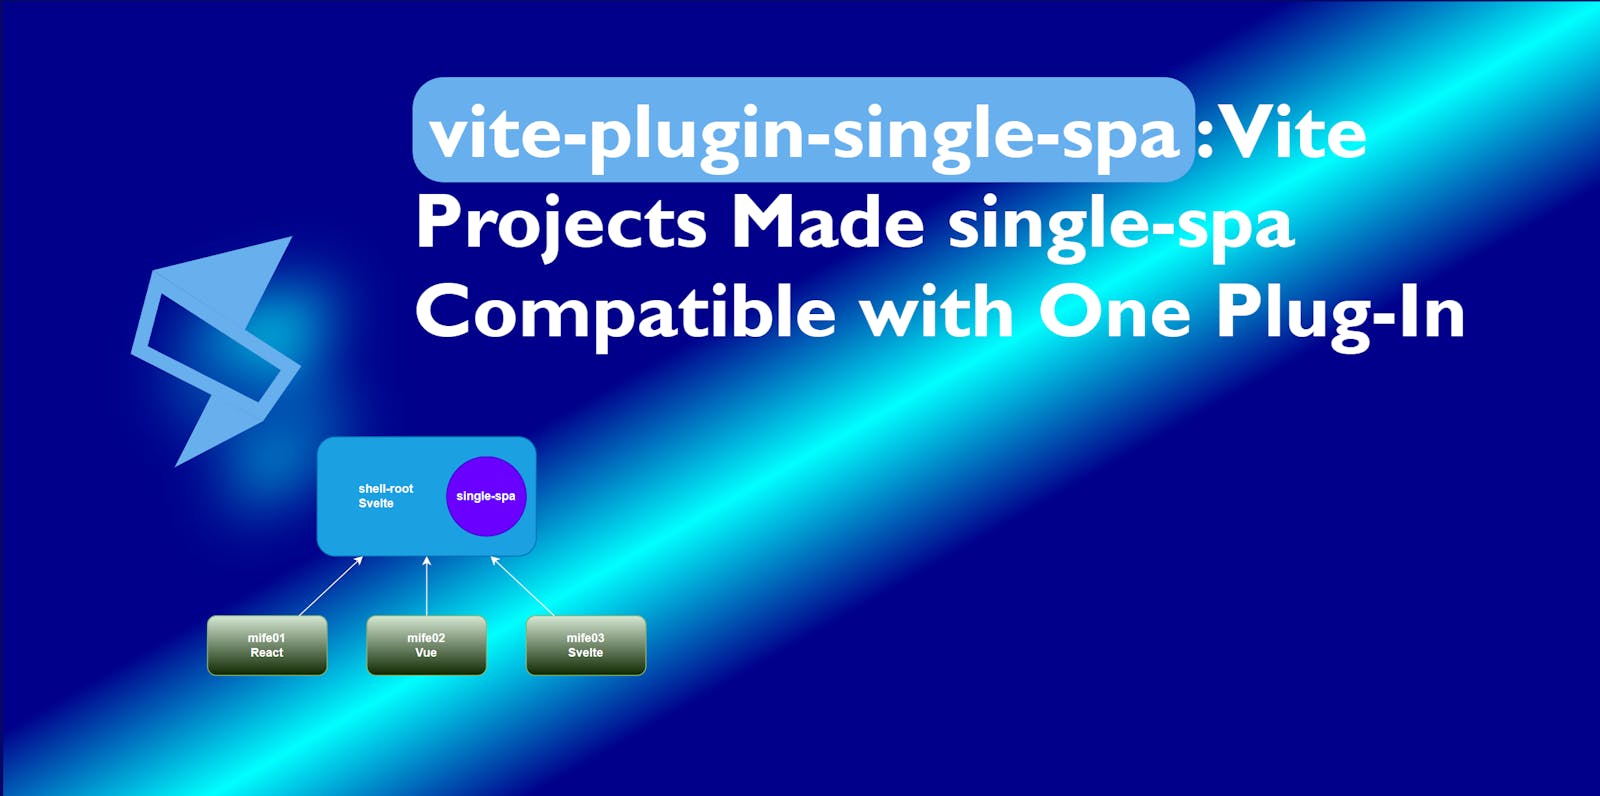 vite-plugin-single-spa:  Vite Projects Made single-spa Compatible with One Plug-In